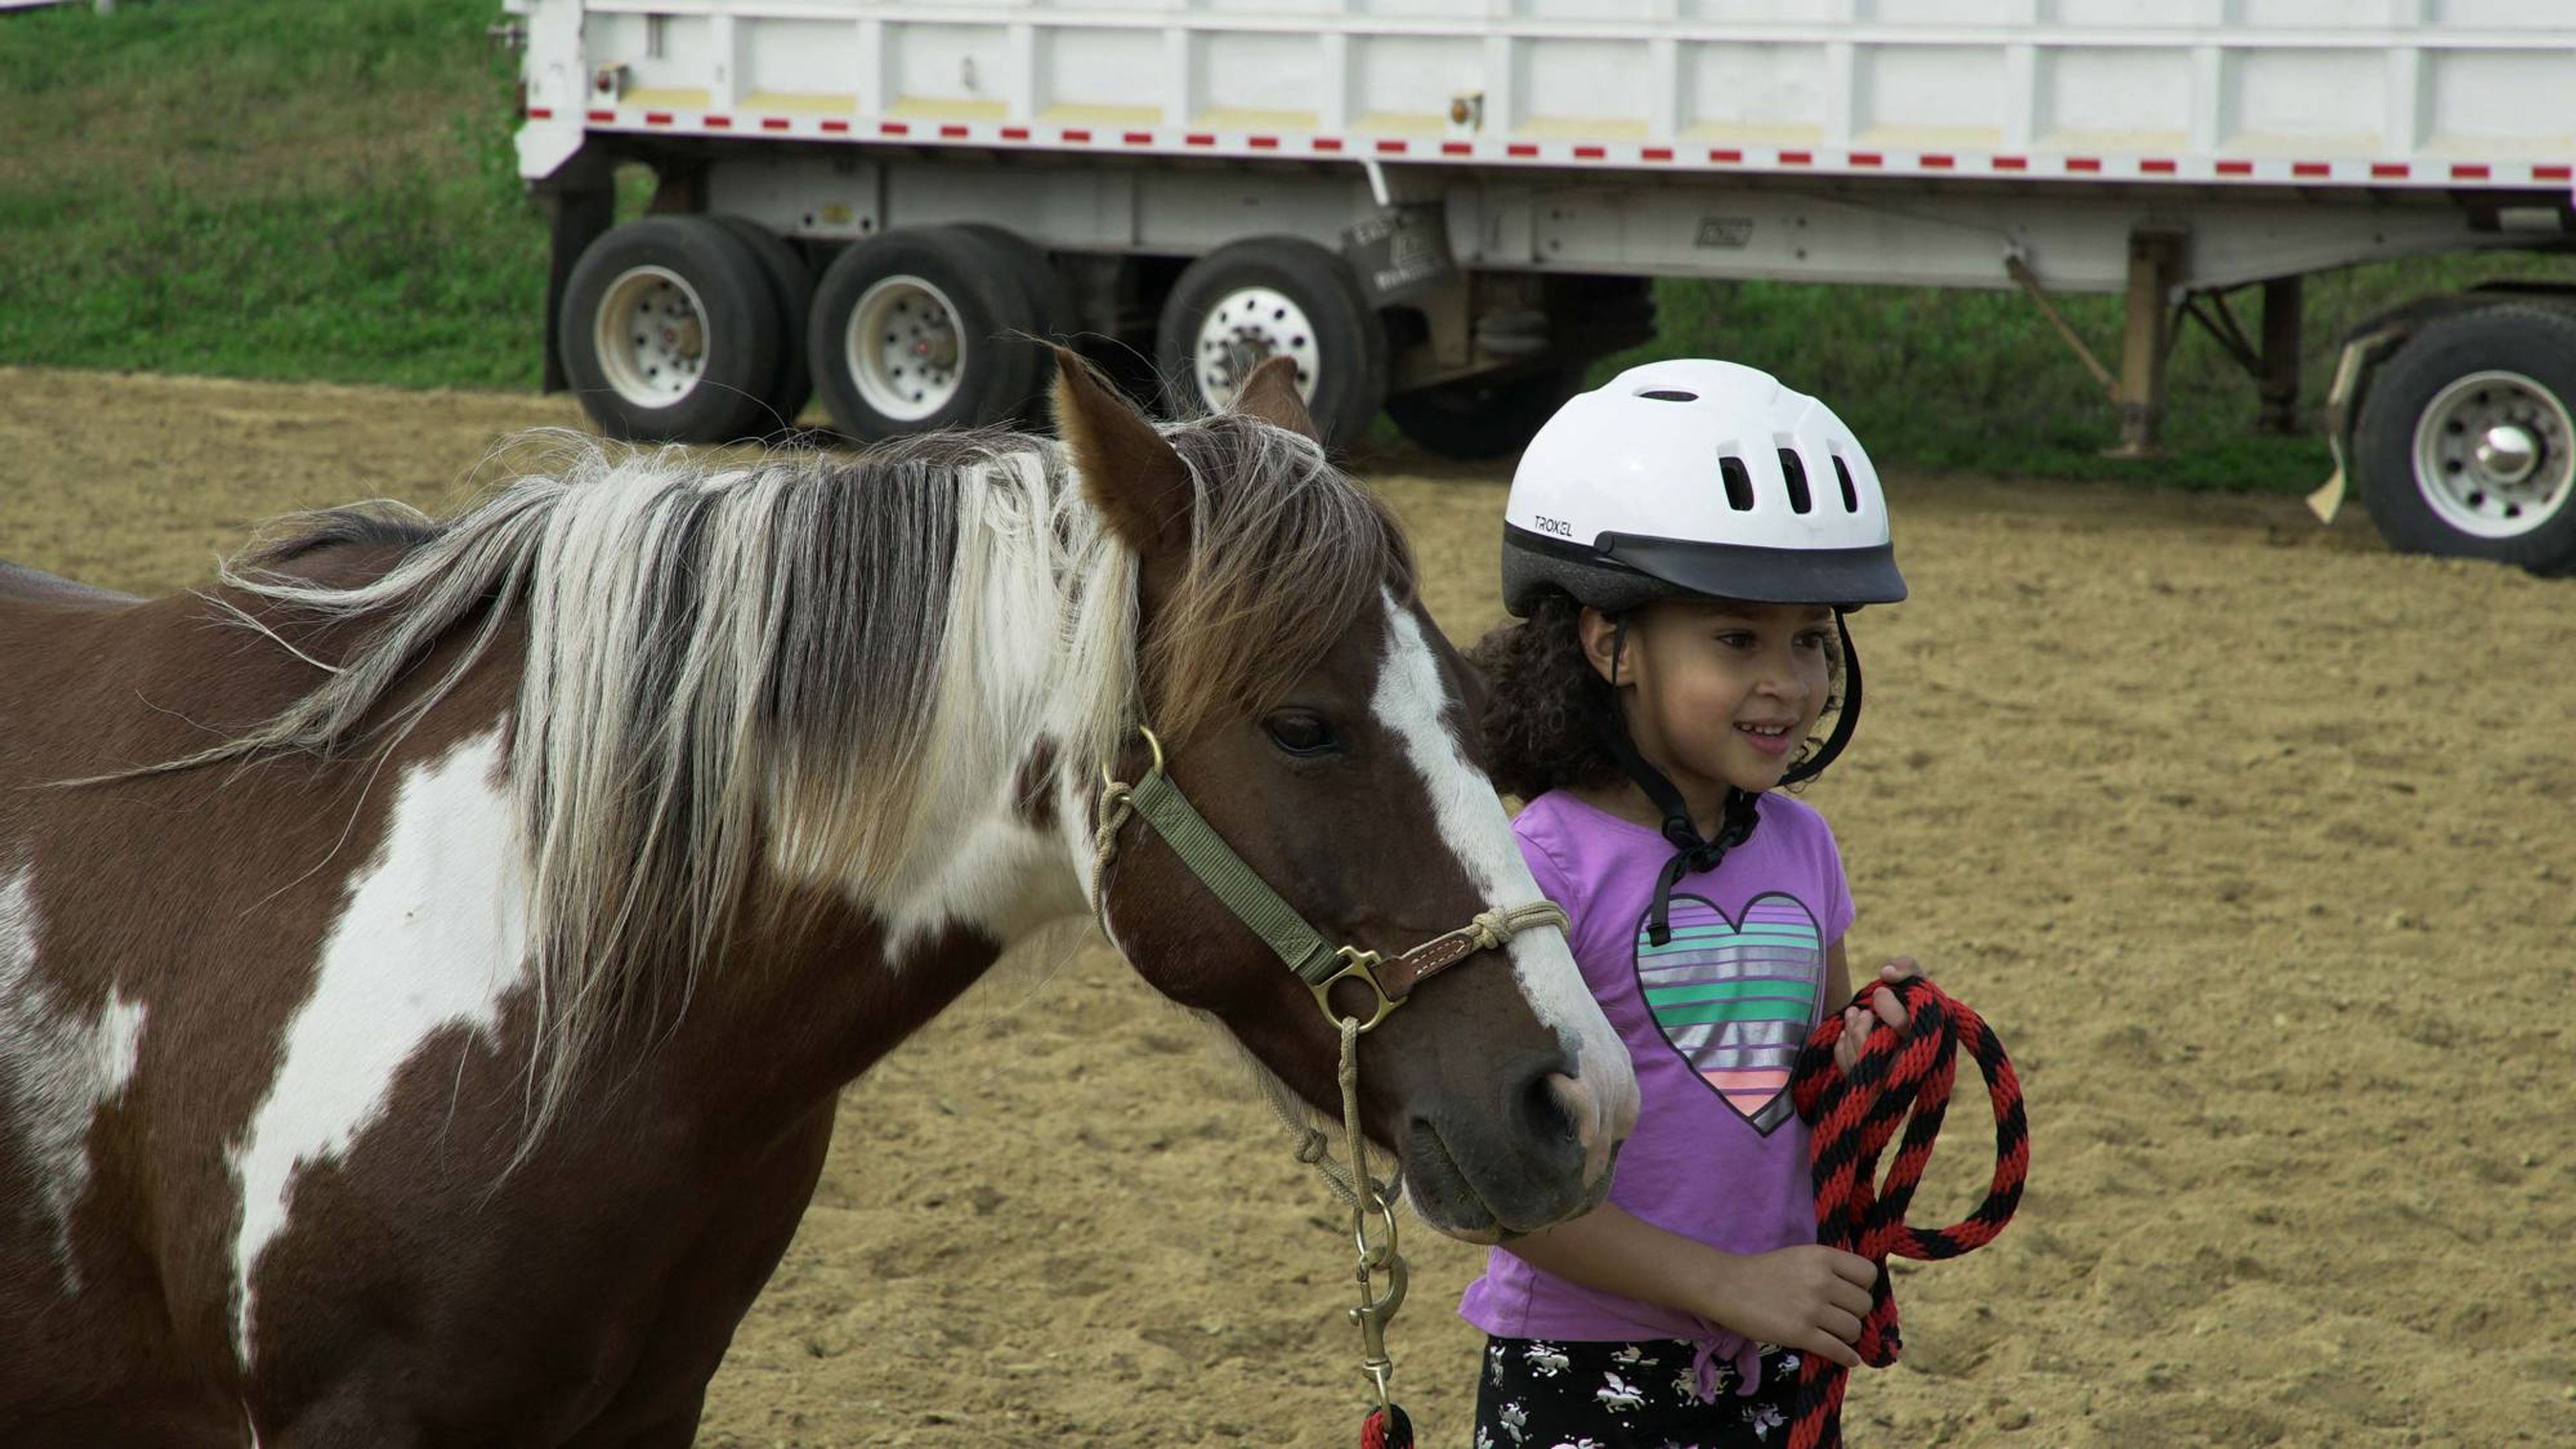 A young girl smiles while leading a small pony.